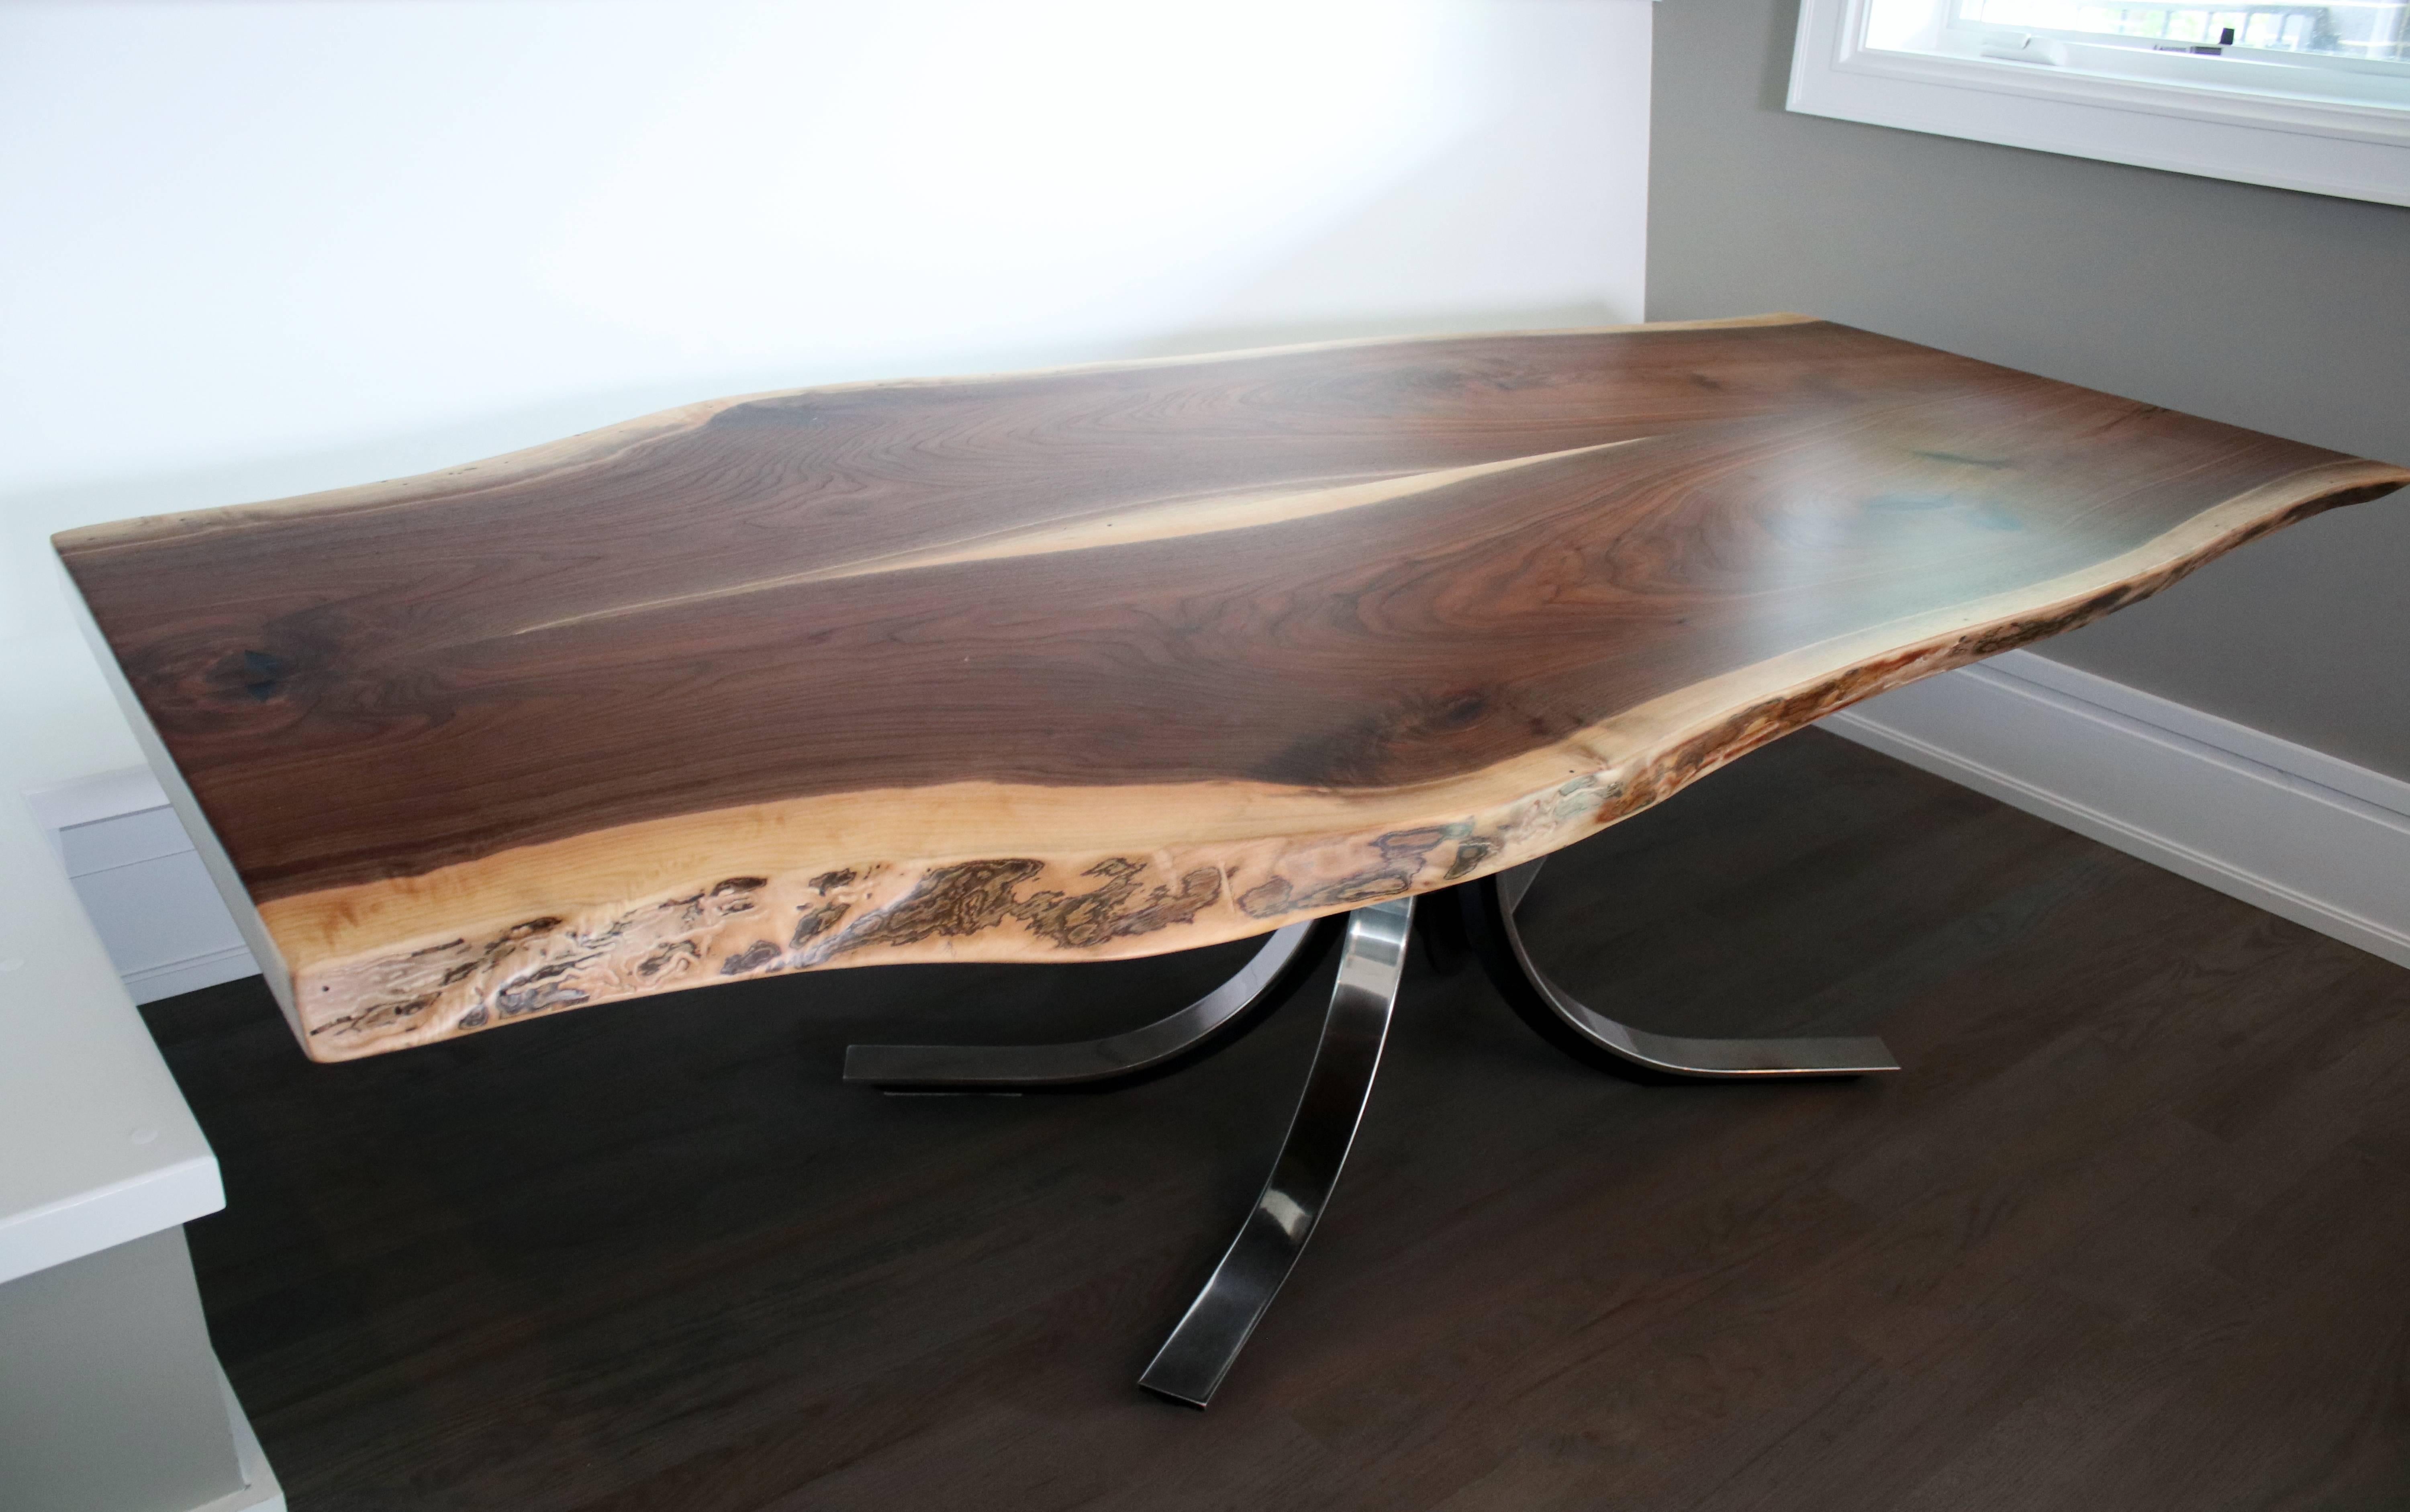 Midcentury chrome and iron table base by Osvaldo Borsani topped with a new Pennsylvania harvested walnut live edge slab. Truly one-of-a-kind table combining steel with organic live edge material.